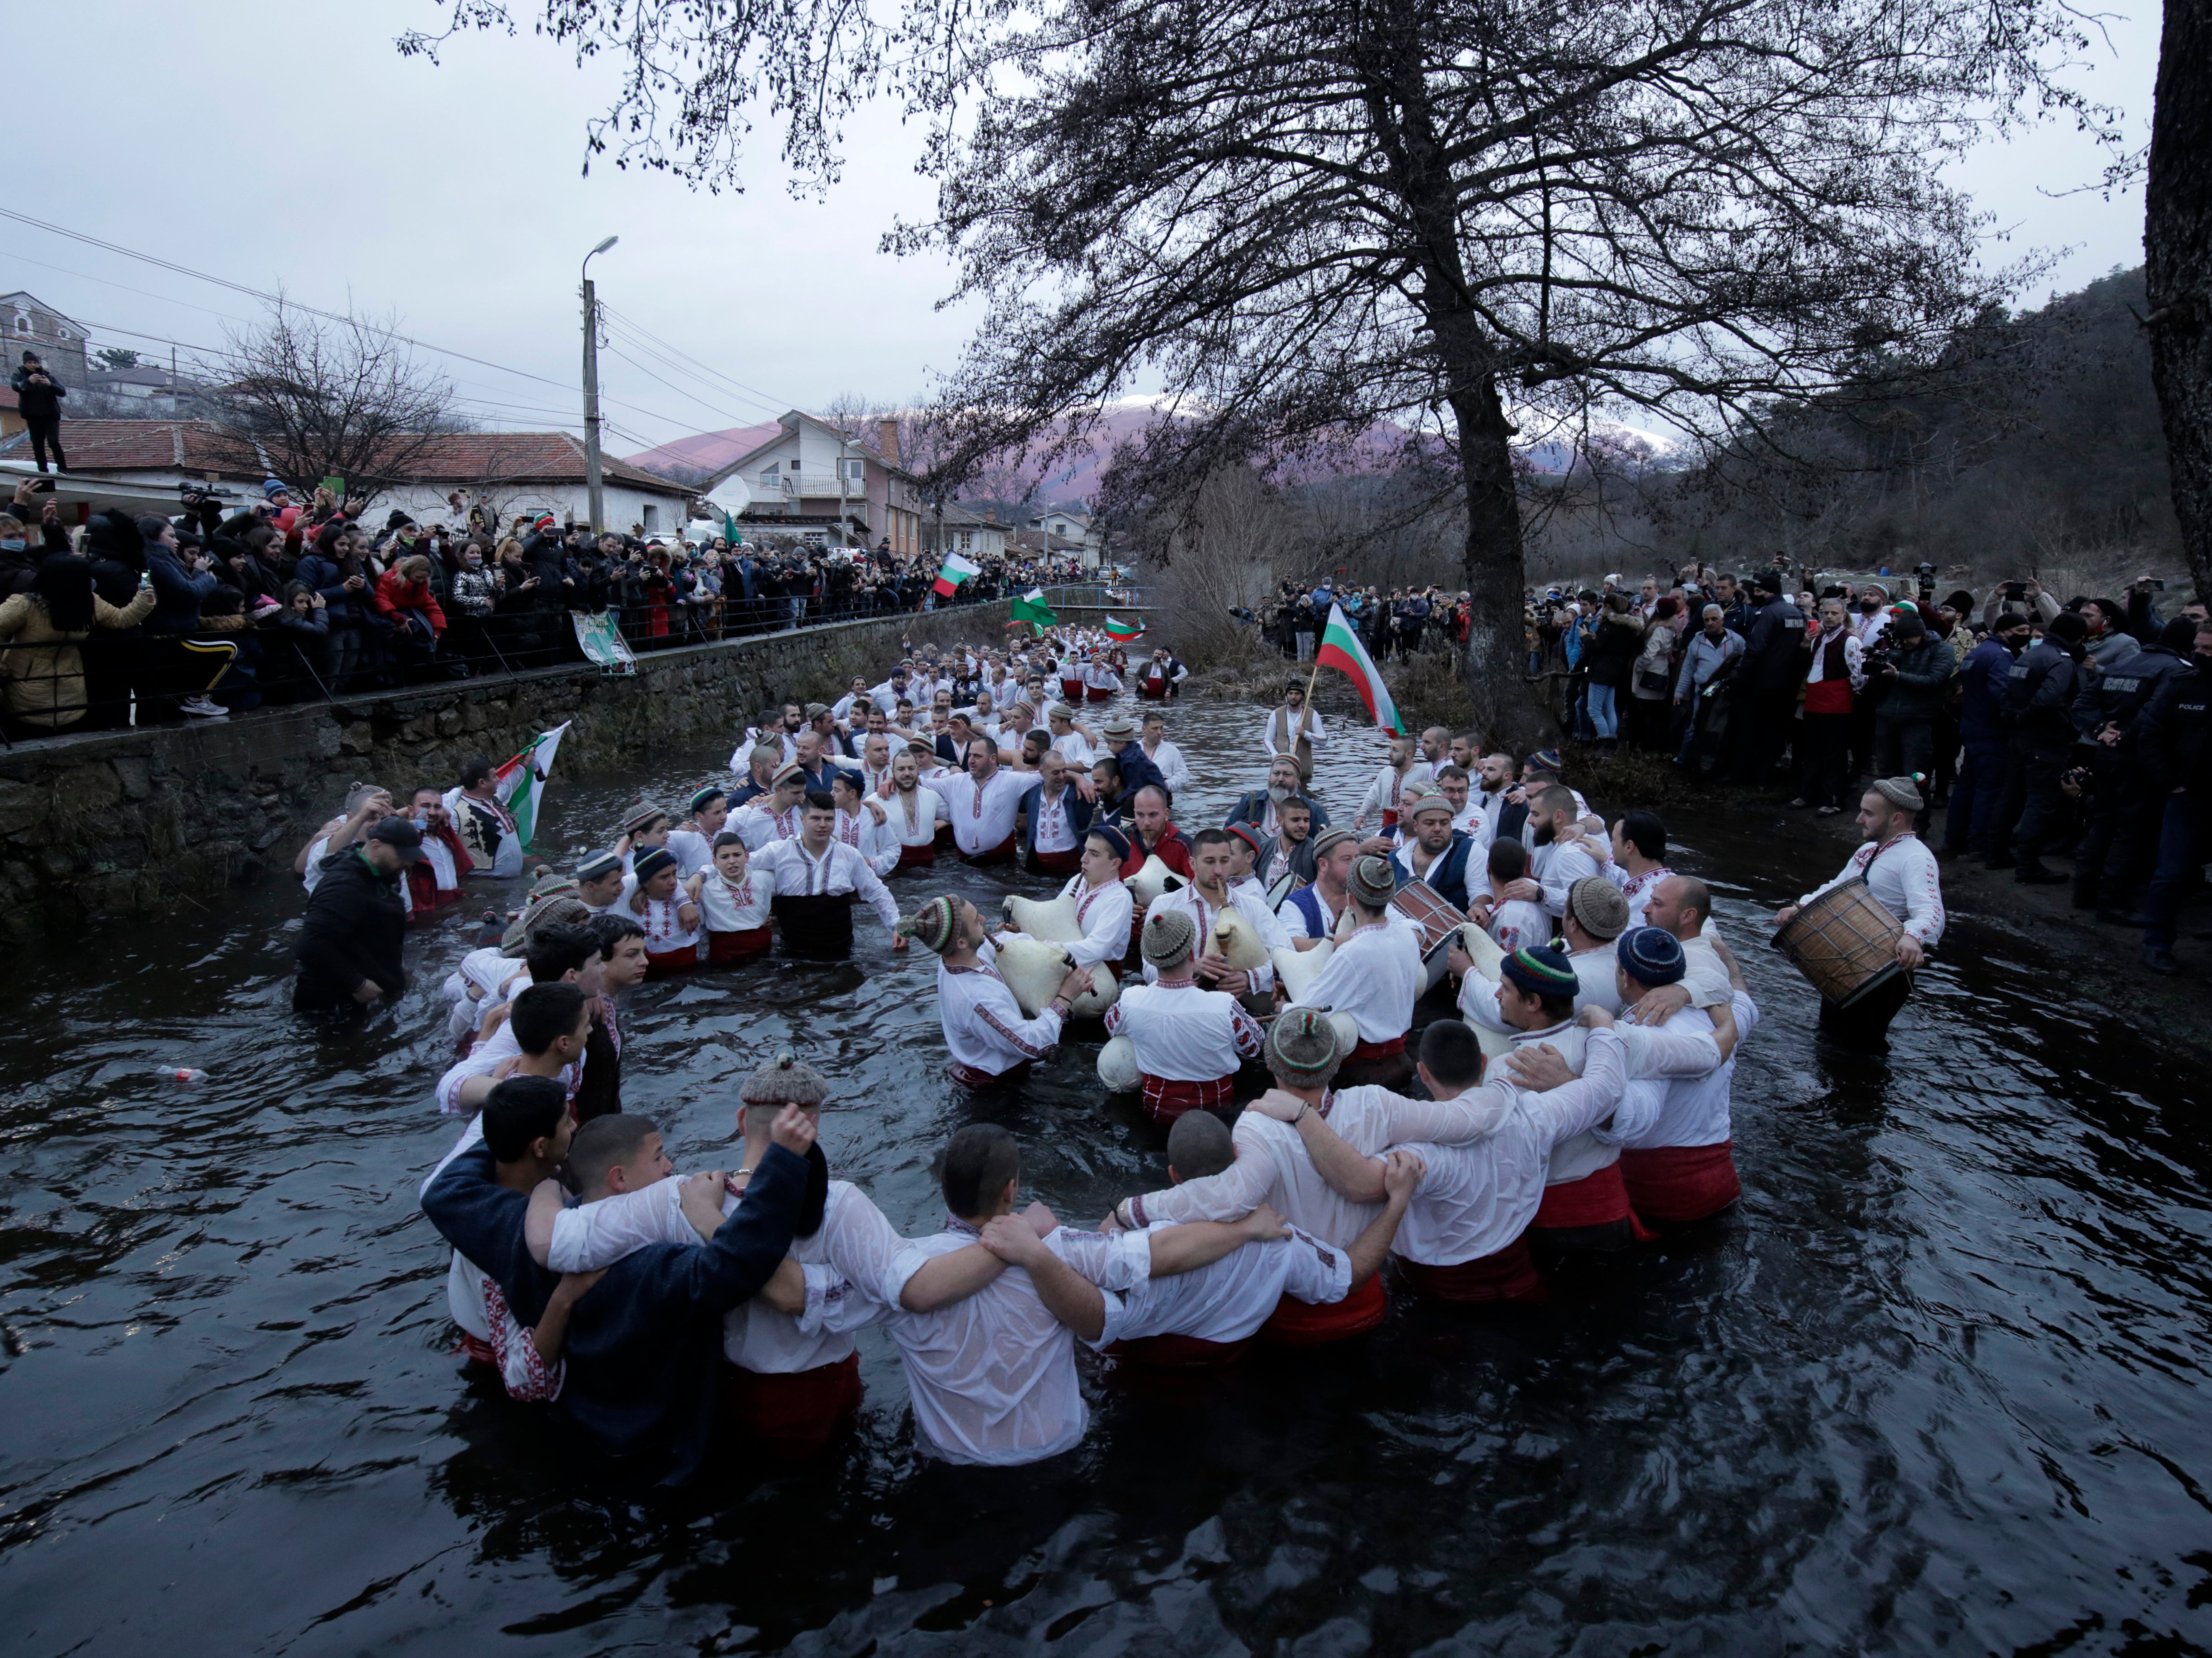 Kalofer citizens stand in the icy Tundzha River ready to recover a crucifix cast by a priest in an old ritual marking the feast of Epiphany